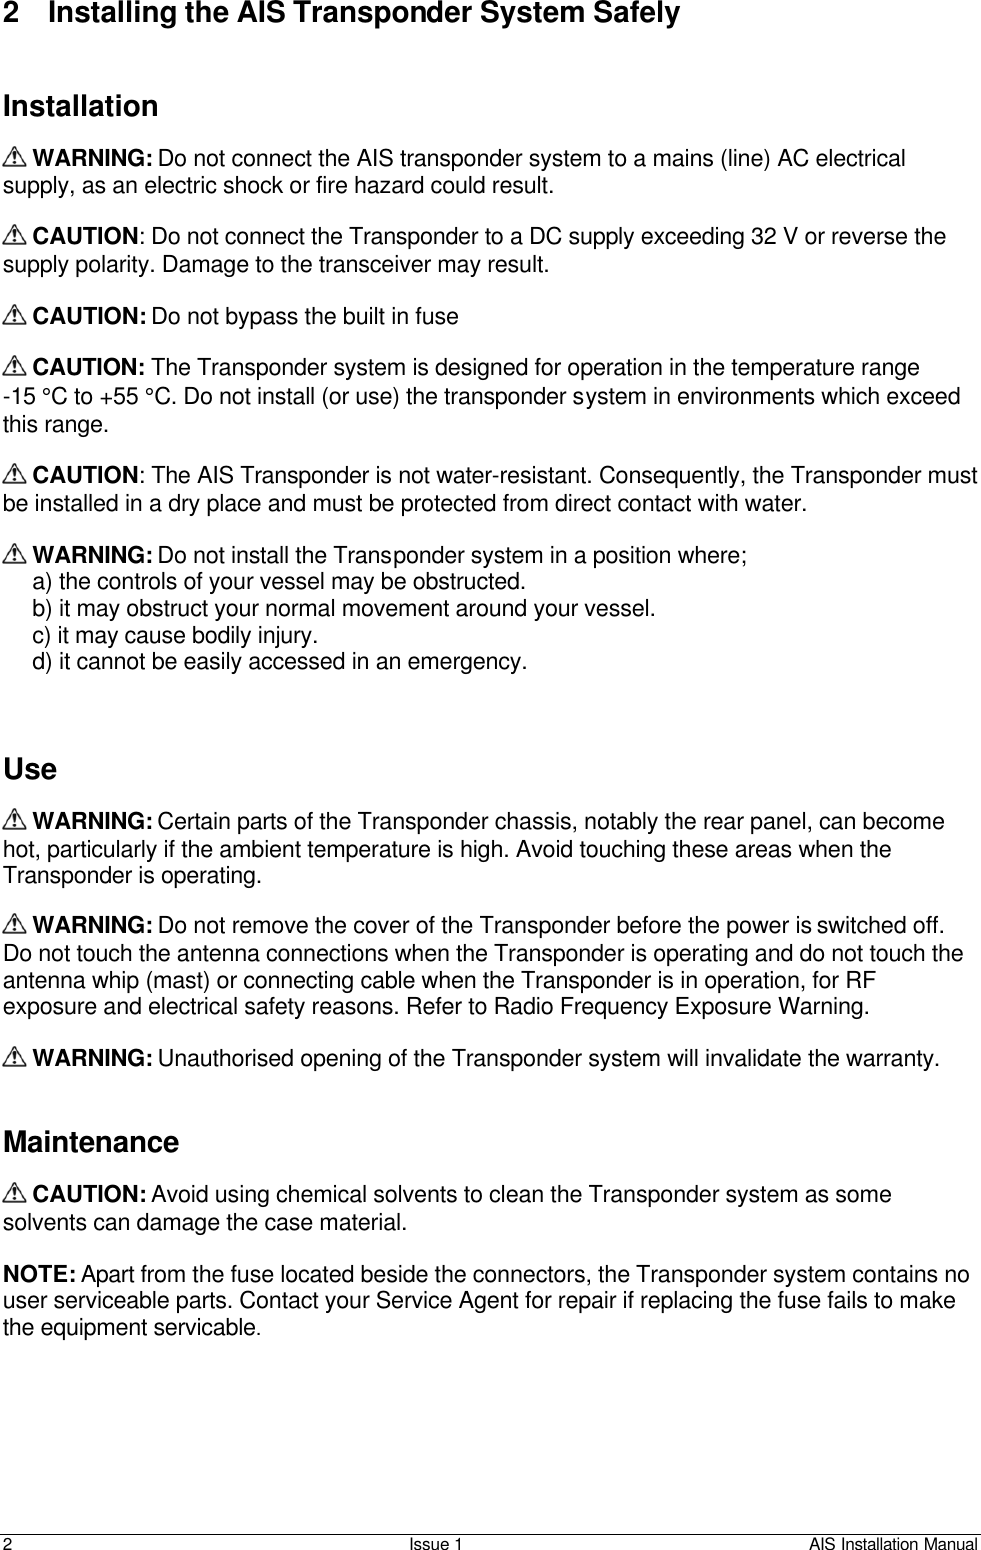    2 Issue 1 AIS Installation Manual 2 Installing the AIS Transponder System Safely    Installation    WARNING: Do not connect the AIS transponder system to a mains (line) AC electrical supply, as an electric shock or fire hazard could result.   CAUTION: Do not connect the Transponder to a DC supply exceeding 32 V or reverse the supply polarity. Damage to the transceiver may result.   CAUTION: Do not bypass the built in fuse   CAUTION: The Transponder system is designed for operation in the temperature range  -15 °C to +55 °C. Do not install (or use) the transponder system in environments which exceed this range.   CAUTION: The AIS Transponder is not water-resistant. Consequently, the Transponder must be installed in a dry place and must be protected from direct contact with water.   WARNING: Do not install the Transponder system in a position where; a) the controls of your vessel may be obstructed. b) it may obstruct your normal movement around your vessel. c) it may cause bodily injury. d) it cannot be easily accessed in an emergency.    Use   WARNING: Certain parts of the Transponder chassis, notably the rear panel, can become hot, particularly if the ambient temperature is high. Avoid touching these areas when the Transponder is operating.   WARNING: Do not remove the cover of the Transponder before the power is switched off. Do not touch the antenna connections when the Transponder is operating and do not touch the antenna whip (mast) or connecting cable when the Transponder is in operation, for RF exposure and electrical safety reasons. Refer to Radio Frequency Exposure Warning.   WARNING: Unauthorised opening of the Transponder system will invalidate the warranty.   Maintenance   CAUTION: Avoid using chemical solvents to clean the Transponder system as some solvents can damage the case material.  NOTE: Apart from the fuse located beside the connectors, the Transponder system contains no user serviceable parts. Contact your Service Agent for repair if replacing the fuse fails to make the equipment servicable.  